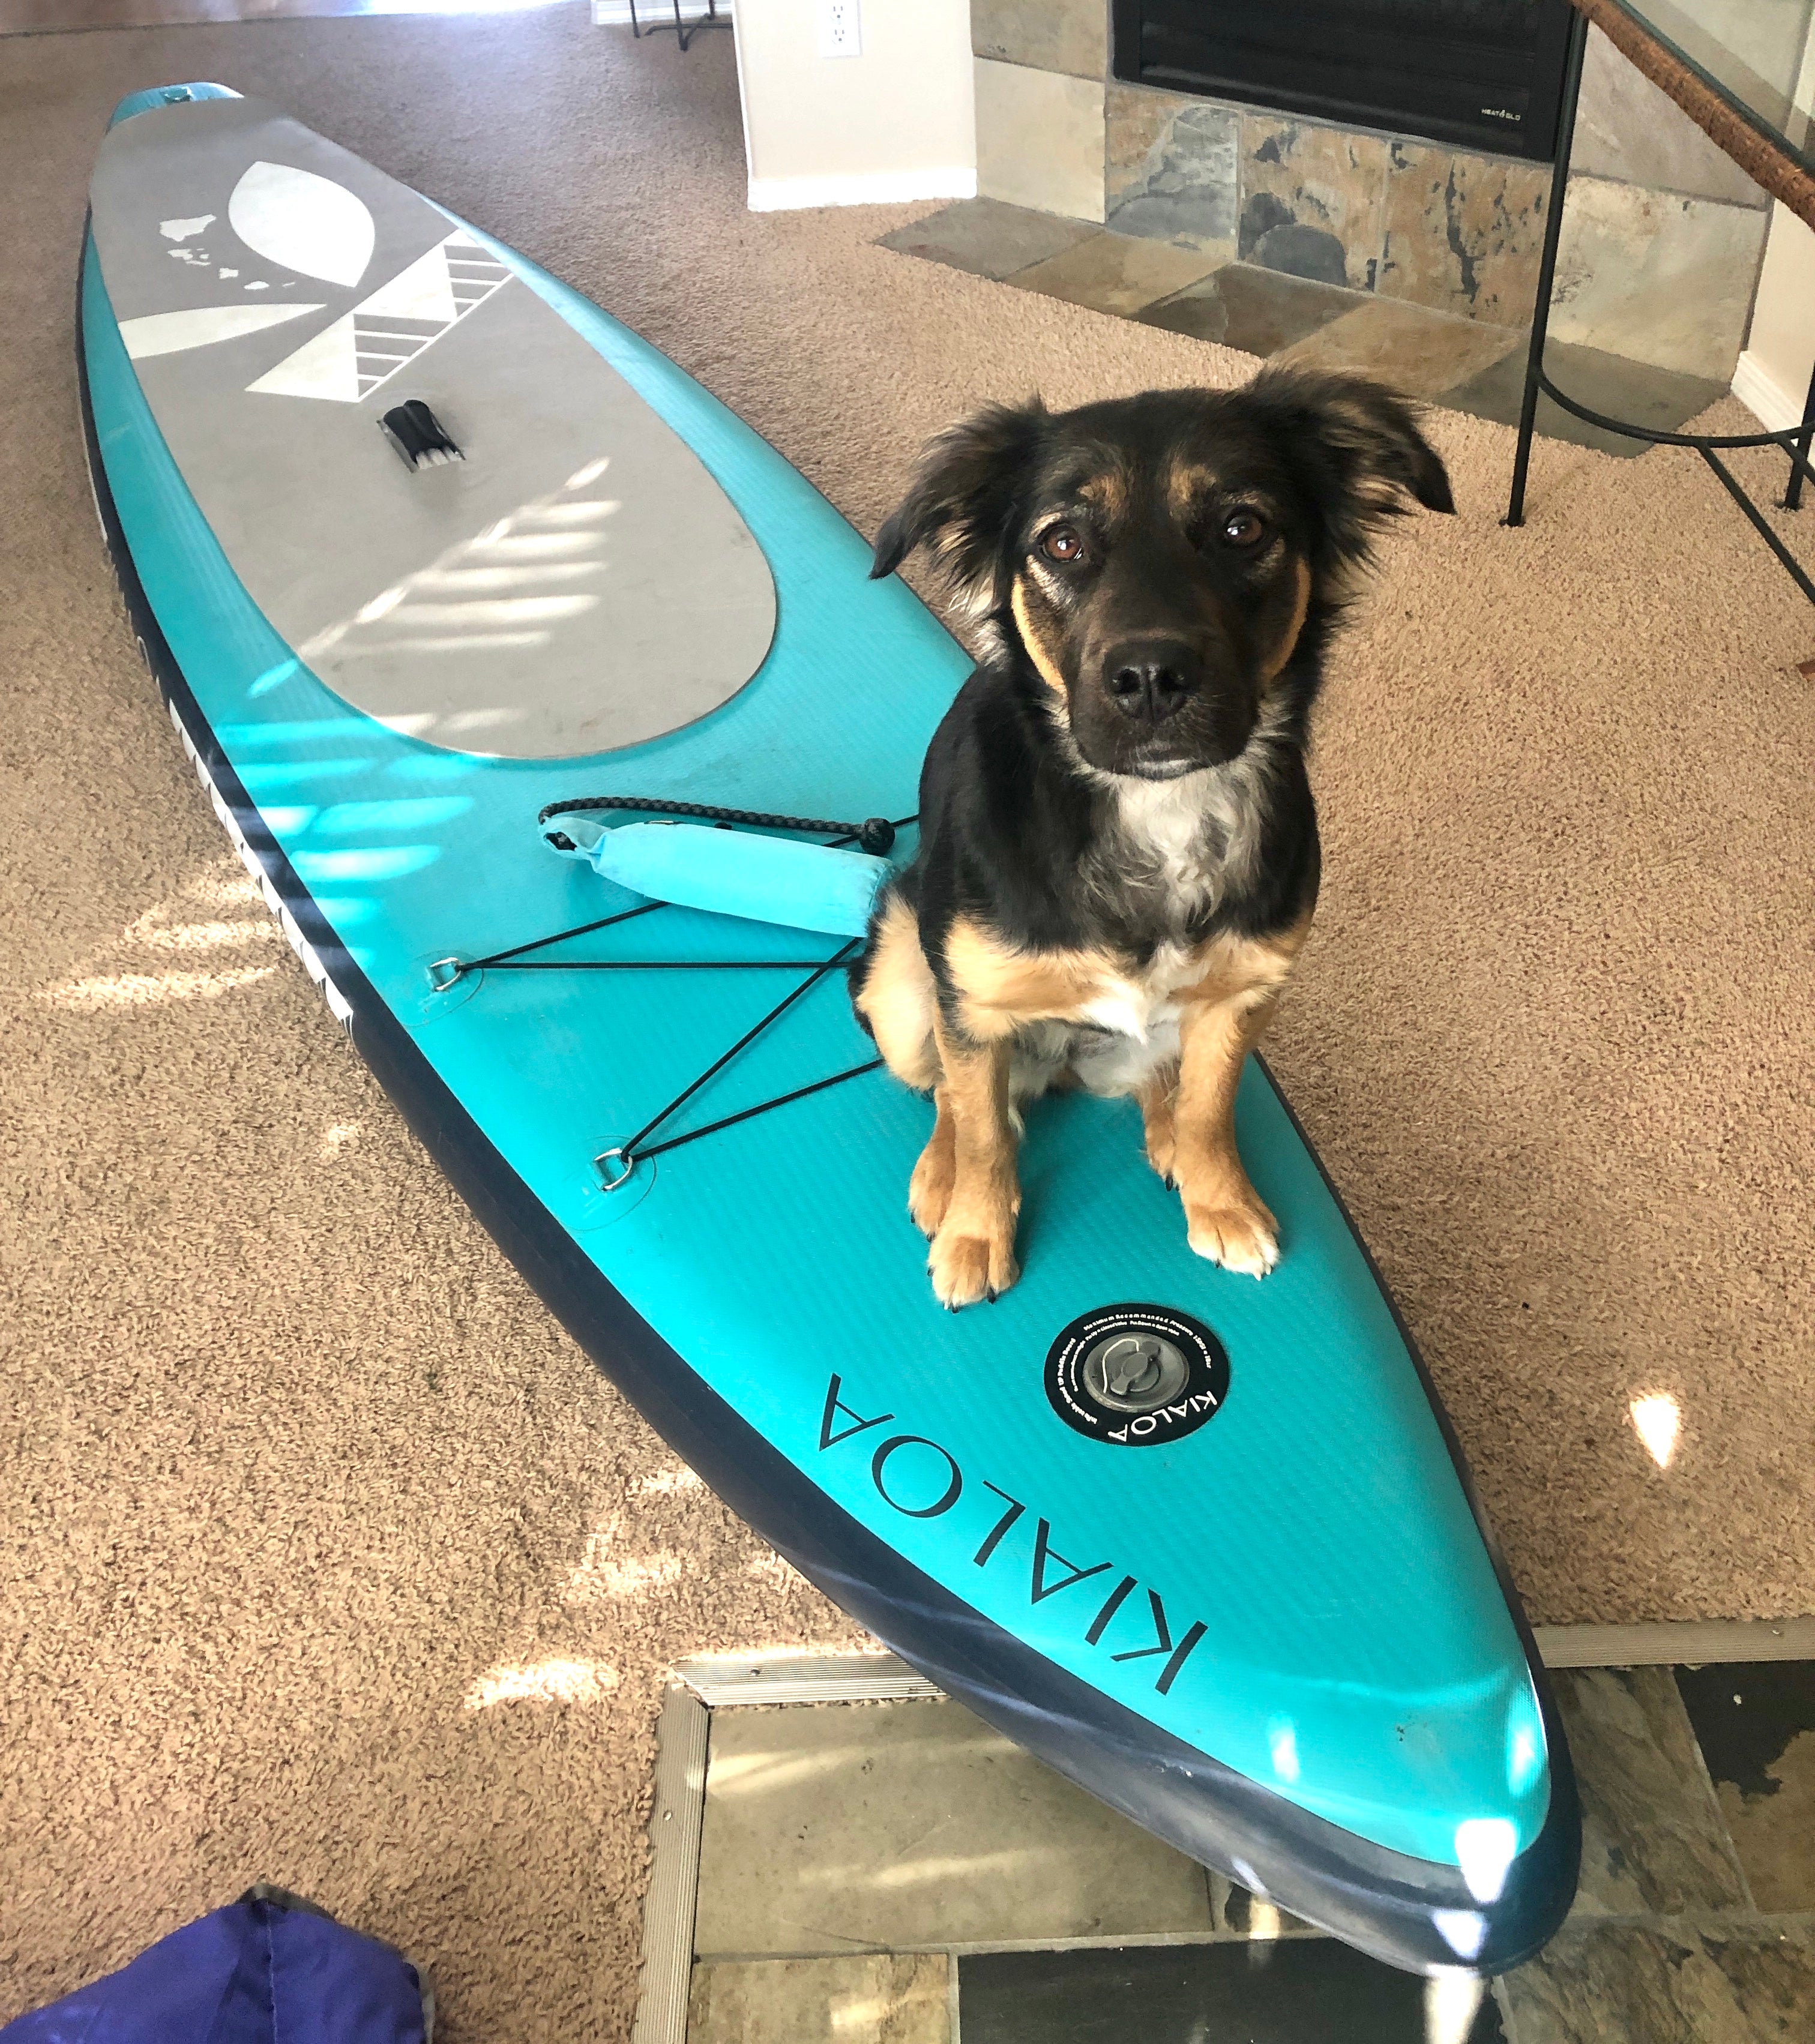 Dog sitting on a paddleboard in a living room